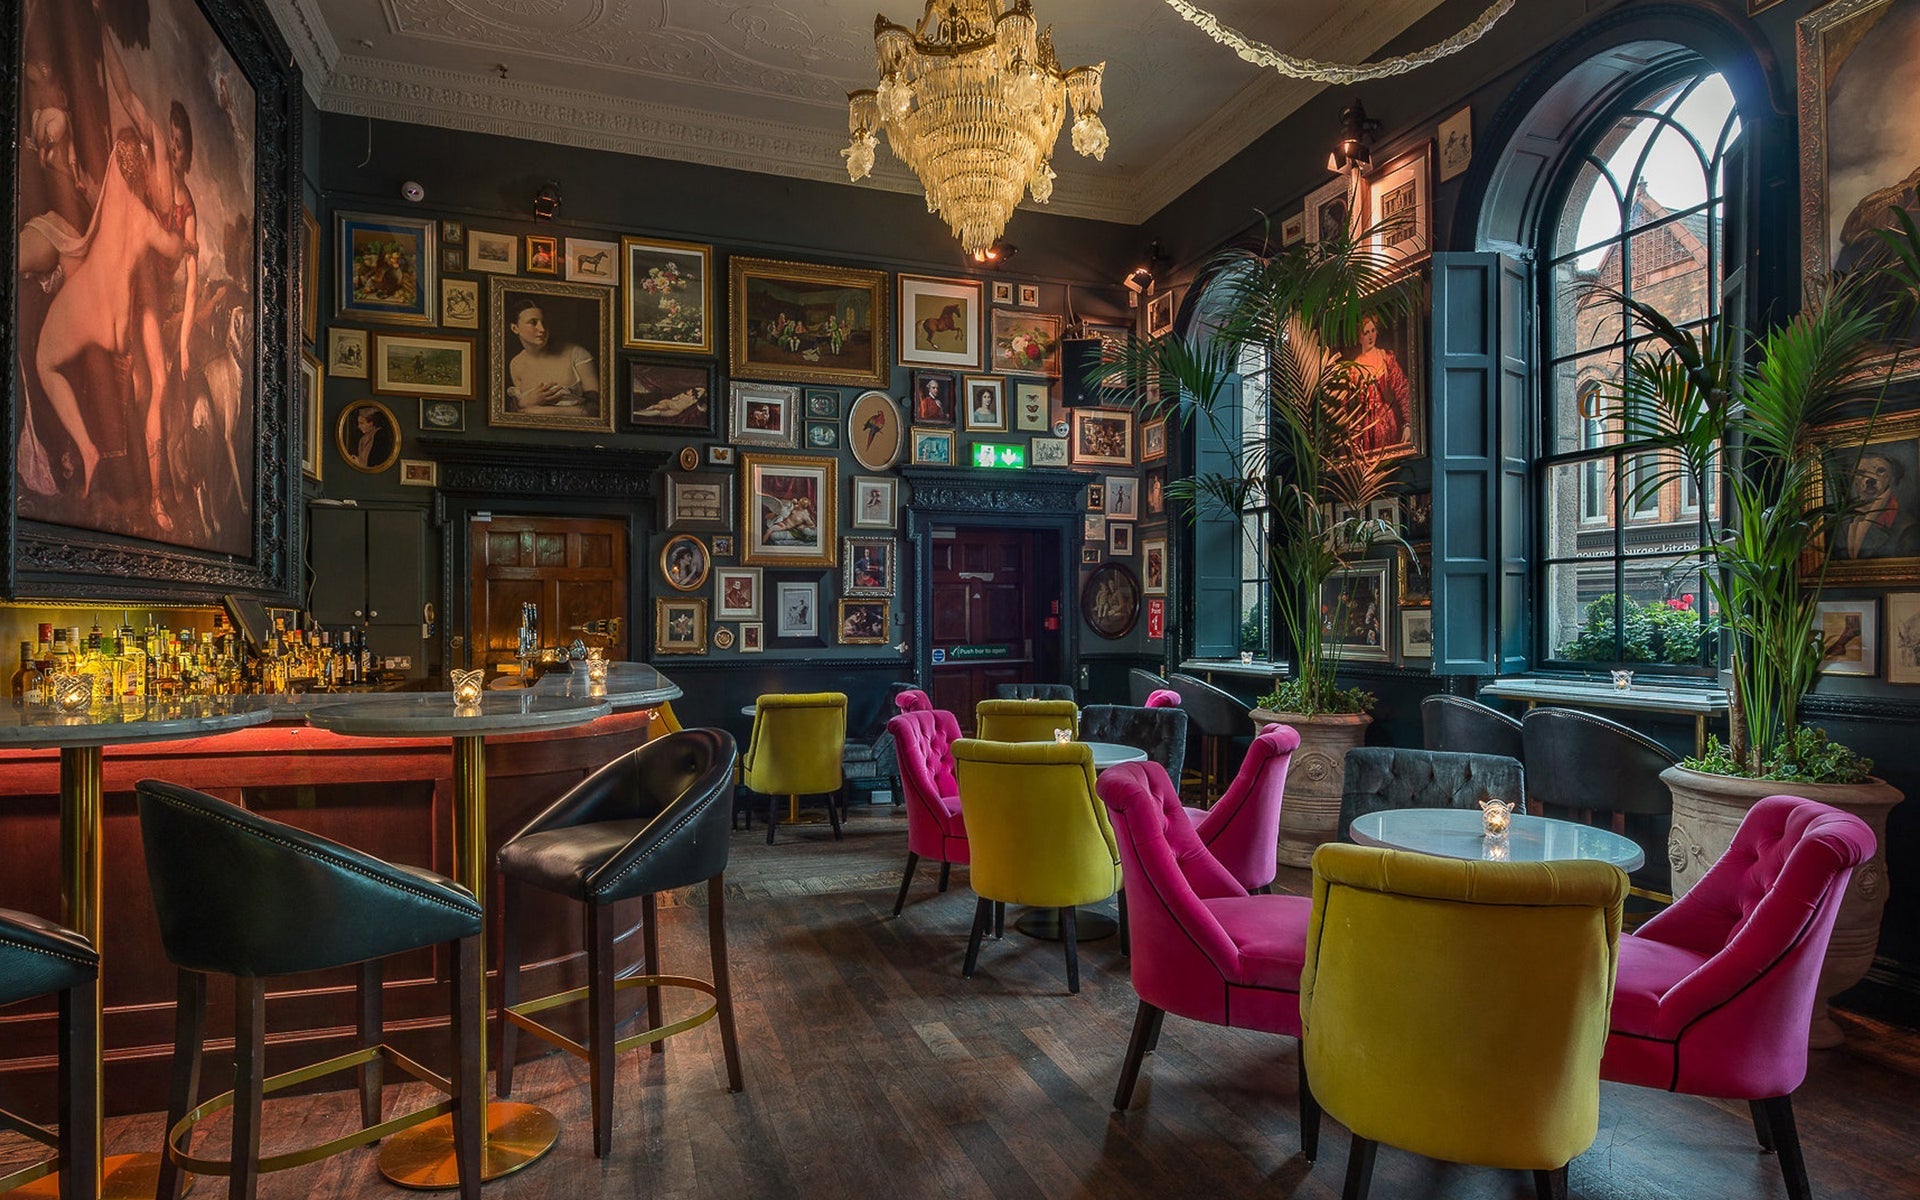 A bar with colourful seats, large window and wall to wall pictures of all sizes